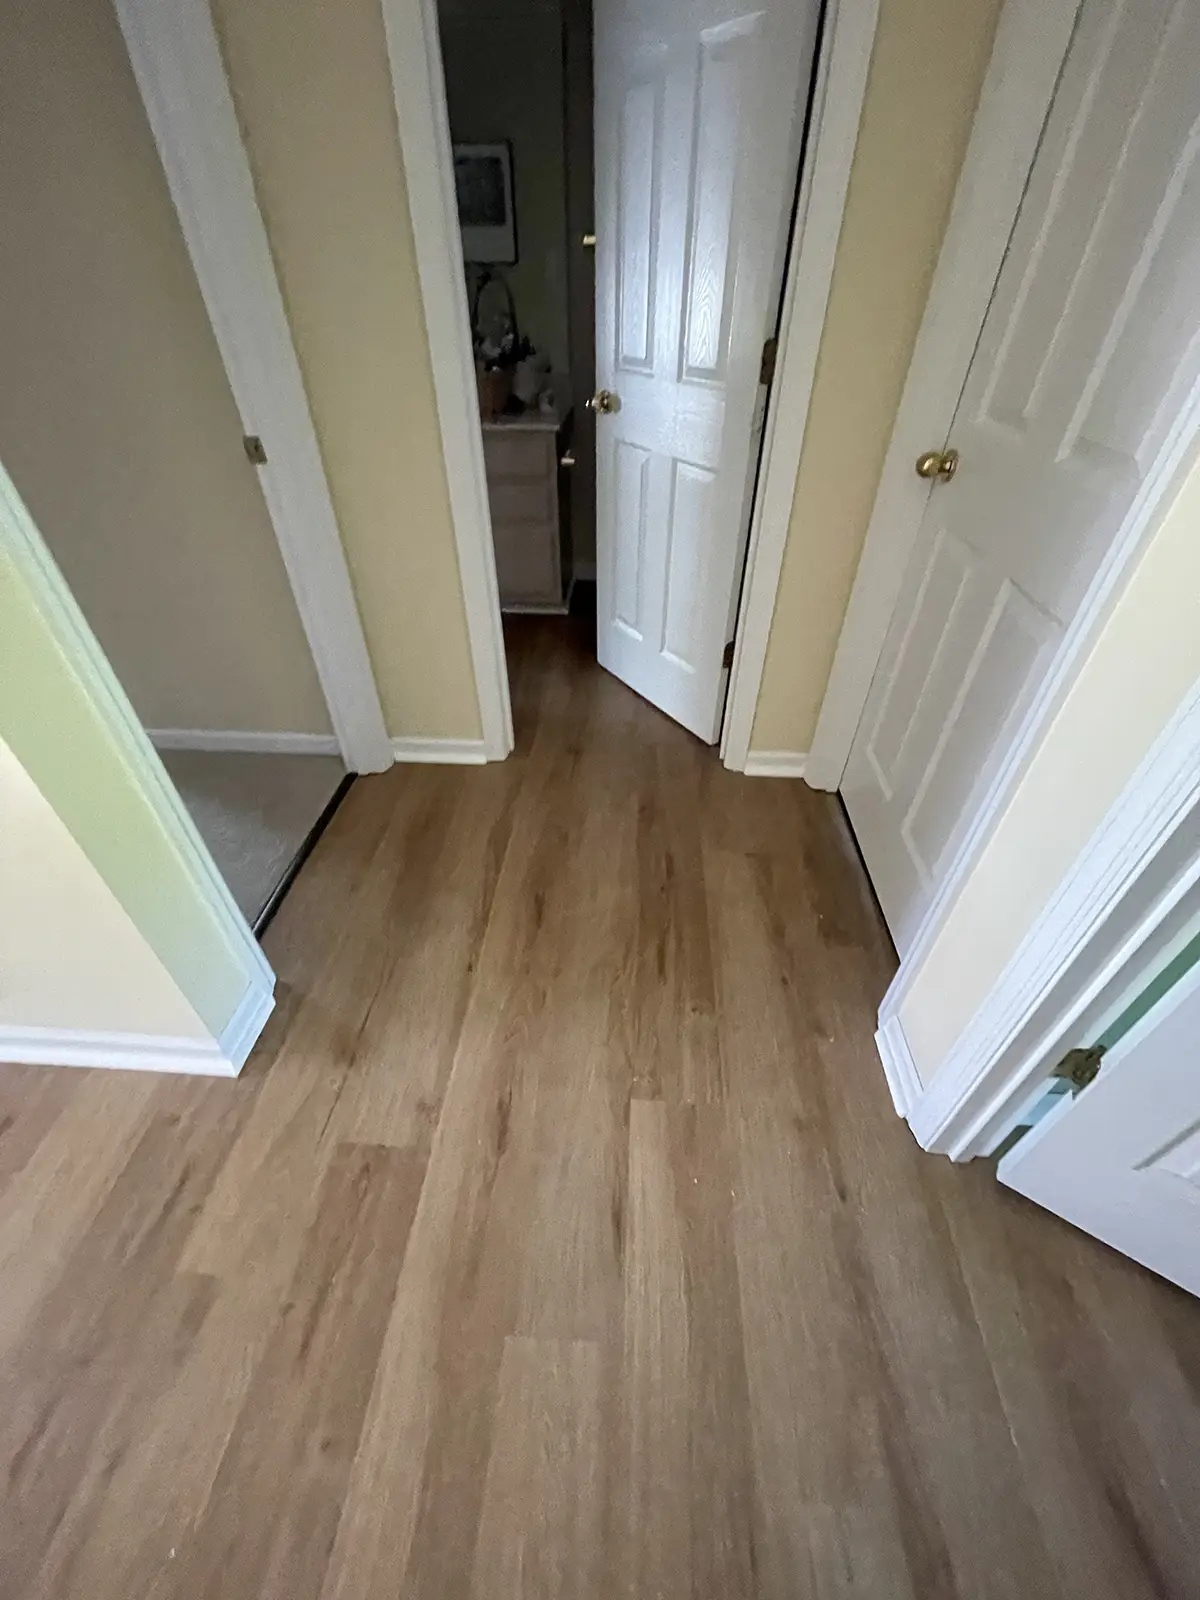 Durable and stylish LVP flooring in a high-traffic home hallway.